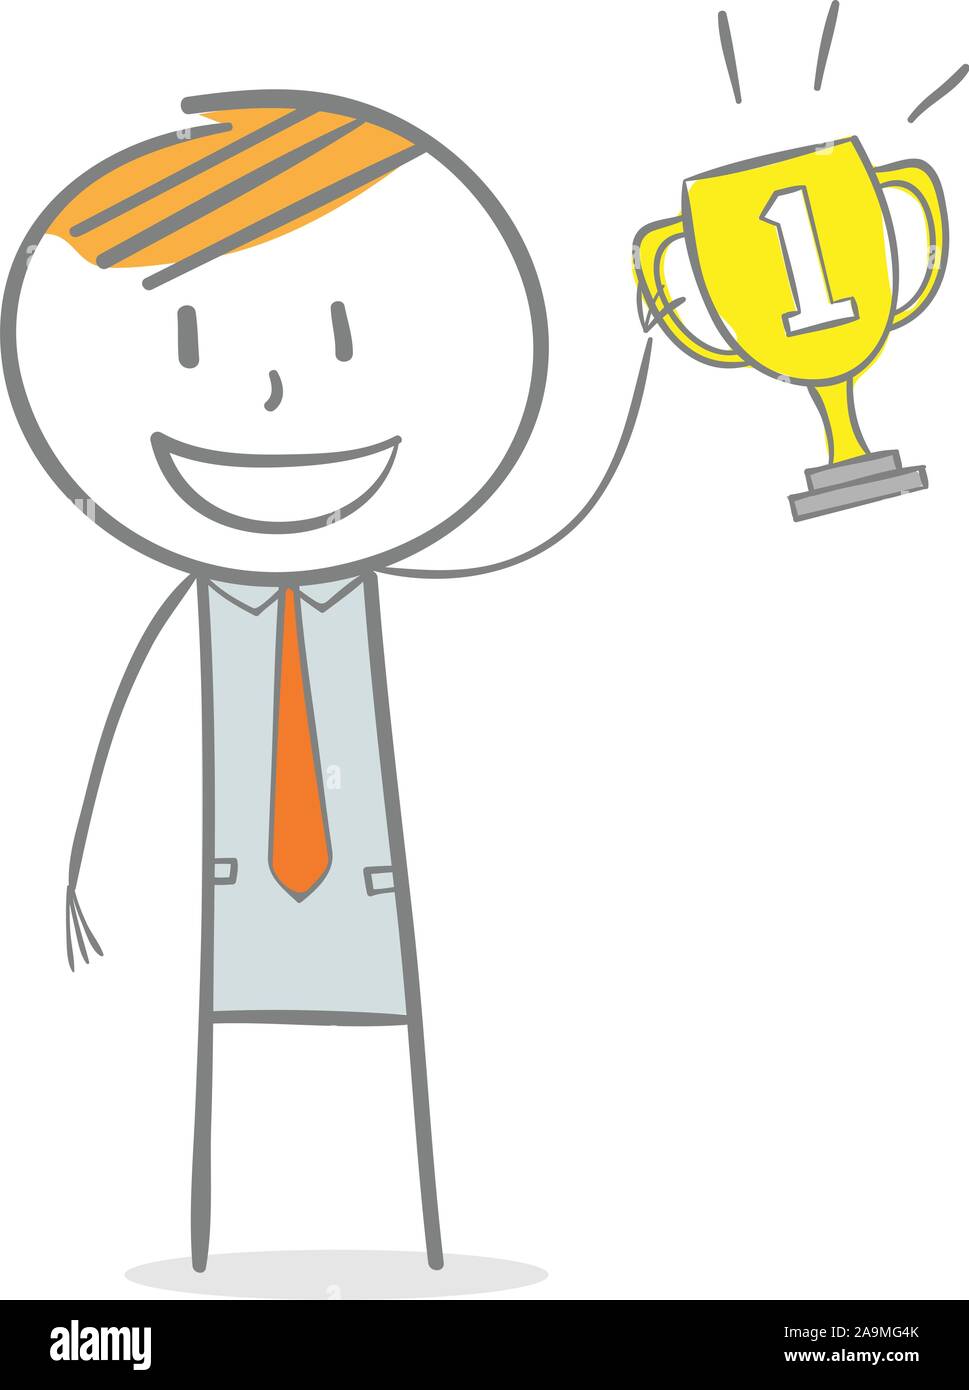 Doodle stick figure: First place. Businessman holding a trophy Stock Vector